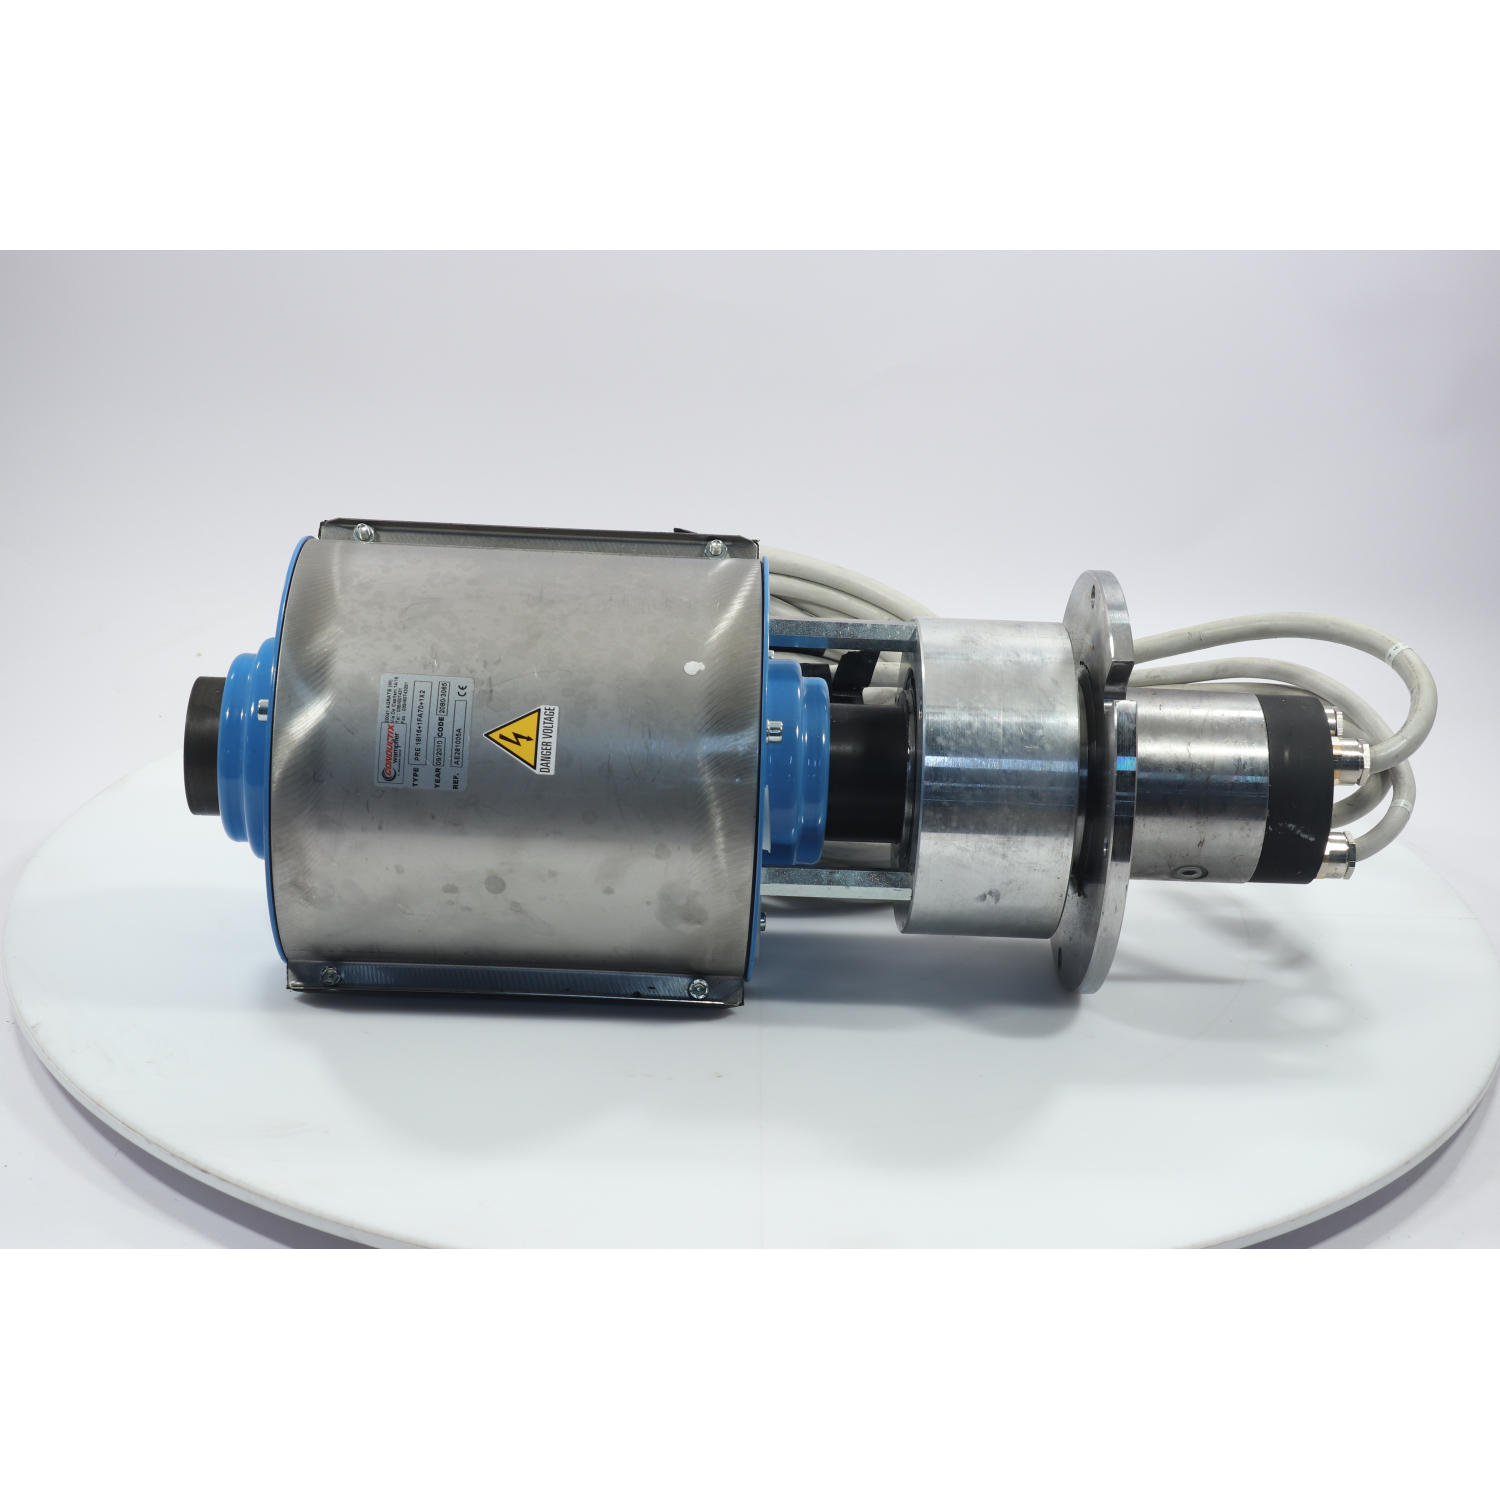 Conductix-Wampfler South East Asia - Conductix-Wampfler industrial slip  rings provide the solution to transmit electric power and electrical  signals from stationary to rotating units in all types of machines. Our  fully developed